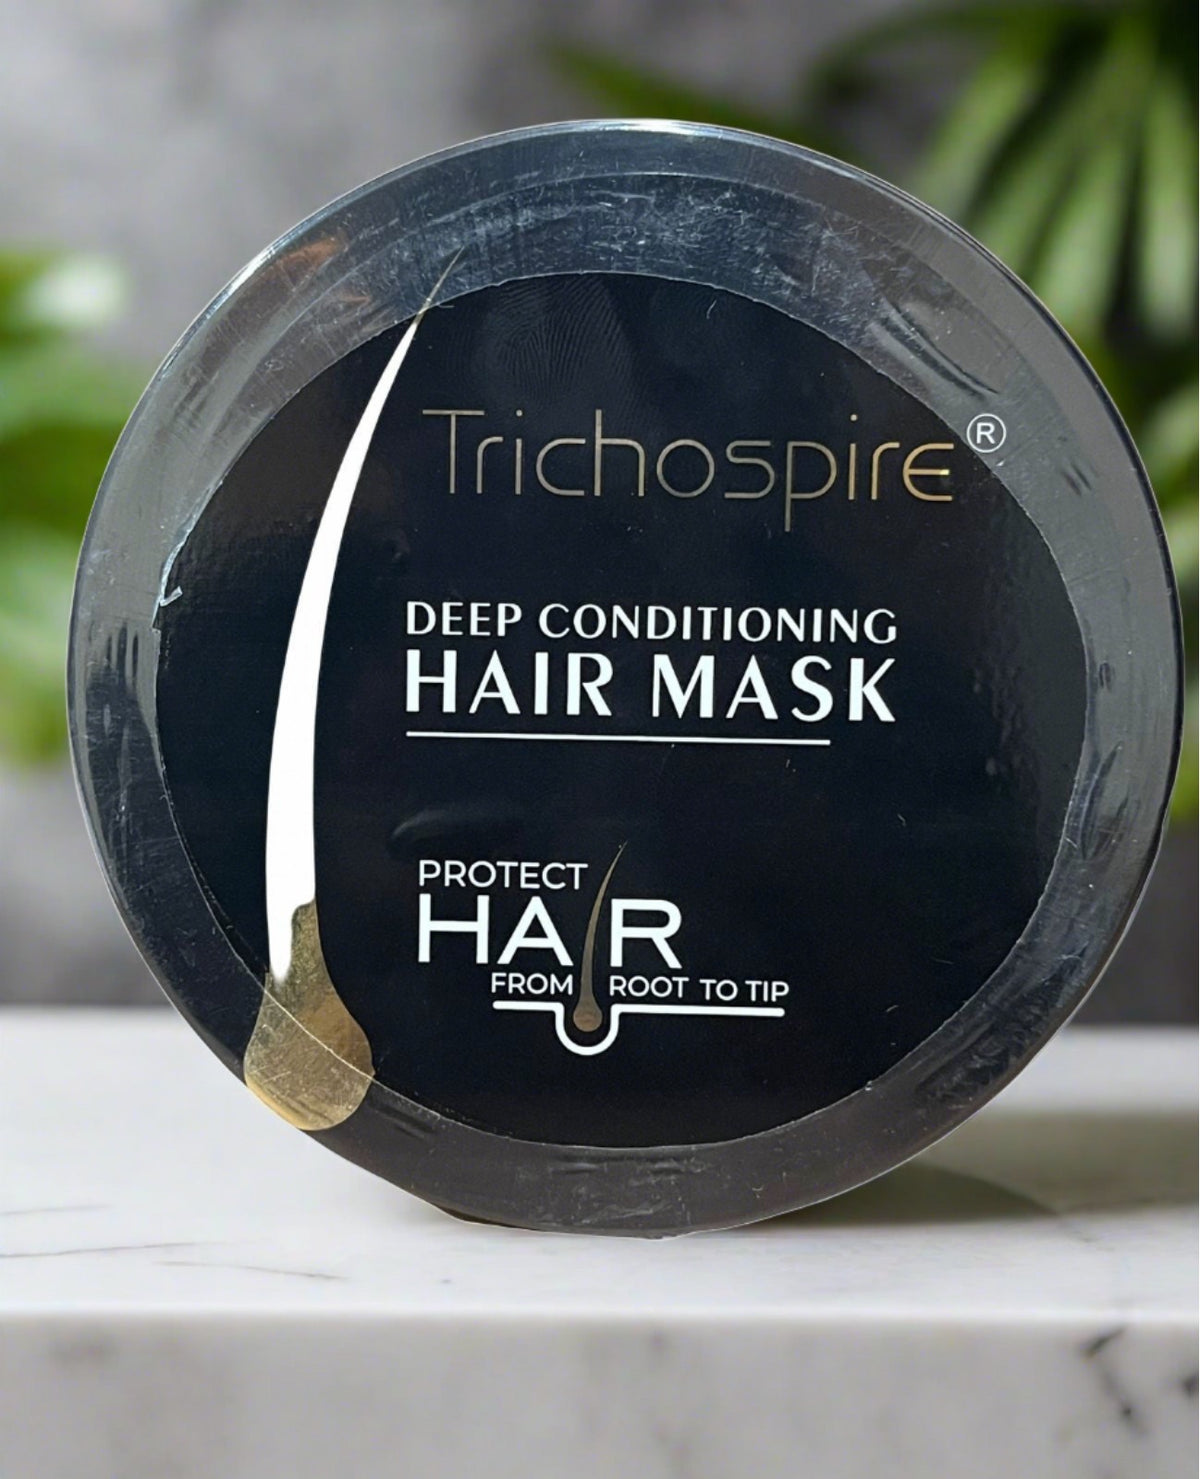 Trichospire deep conditioning  hair mask